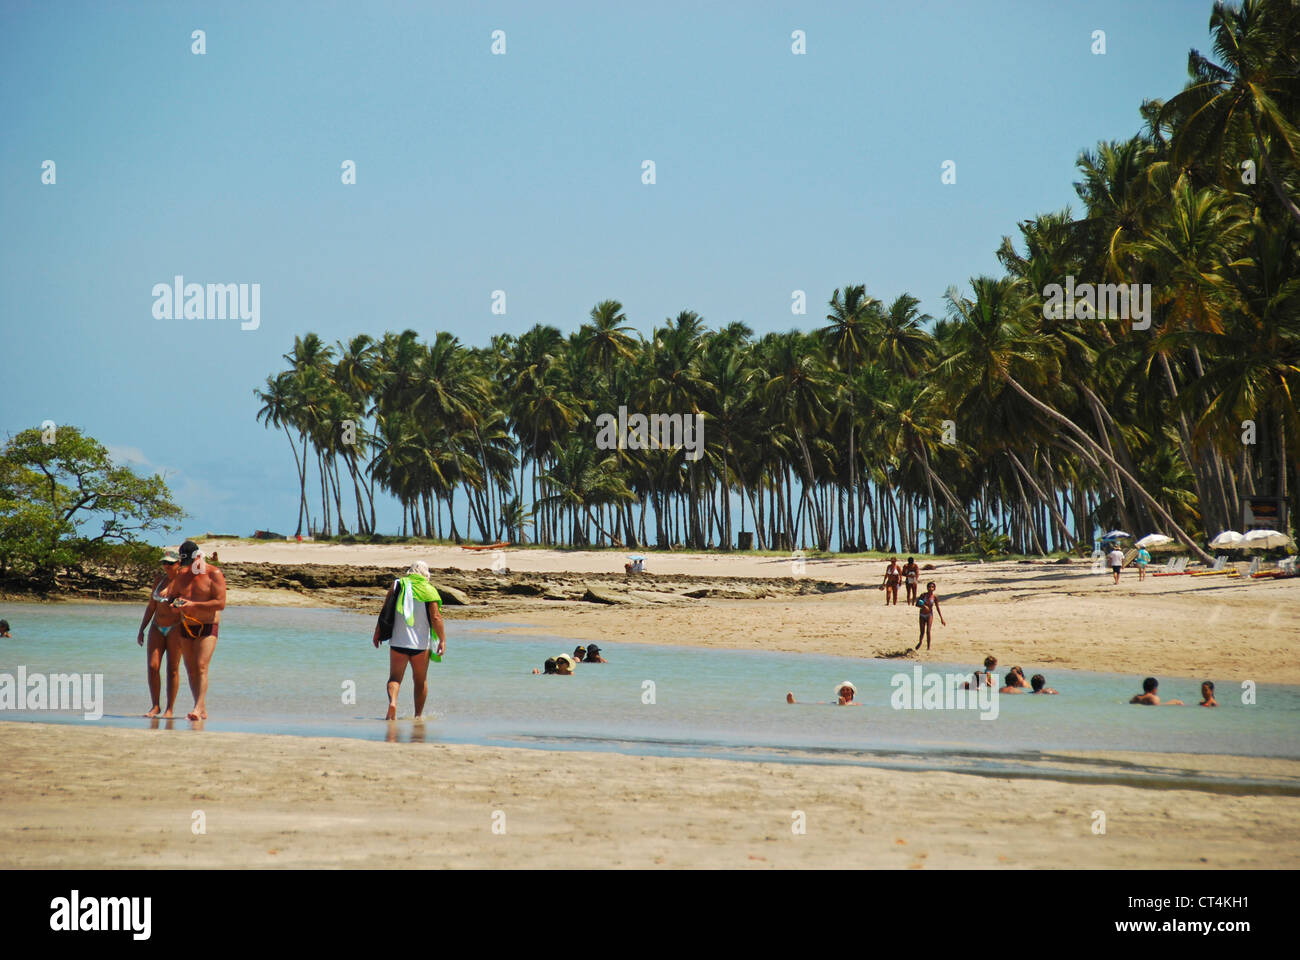 Brazil, Pernambuco, Praia dos Carneiros, tourists looking for natural pool fishes at low tide Stock Photo